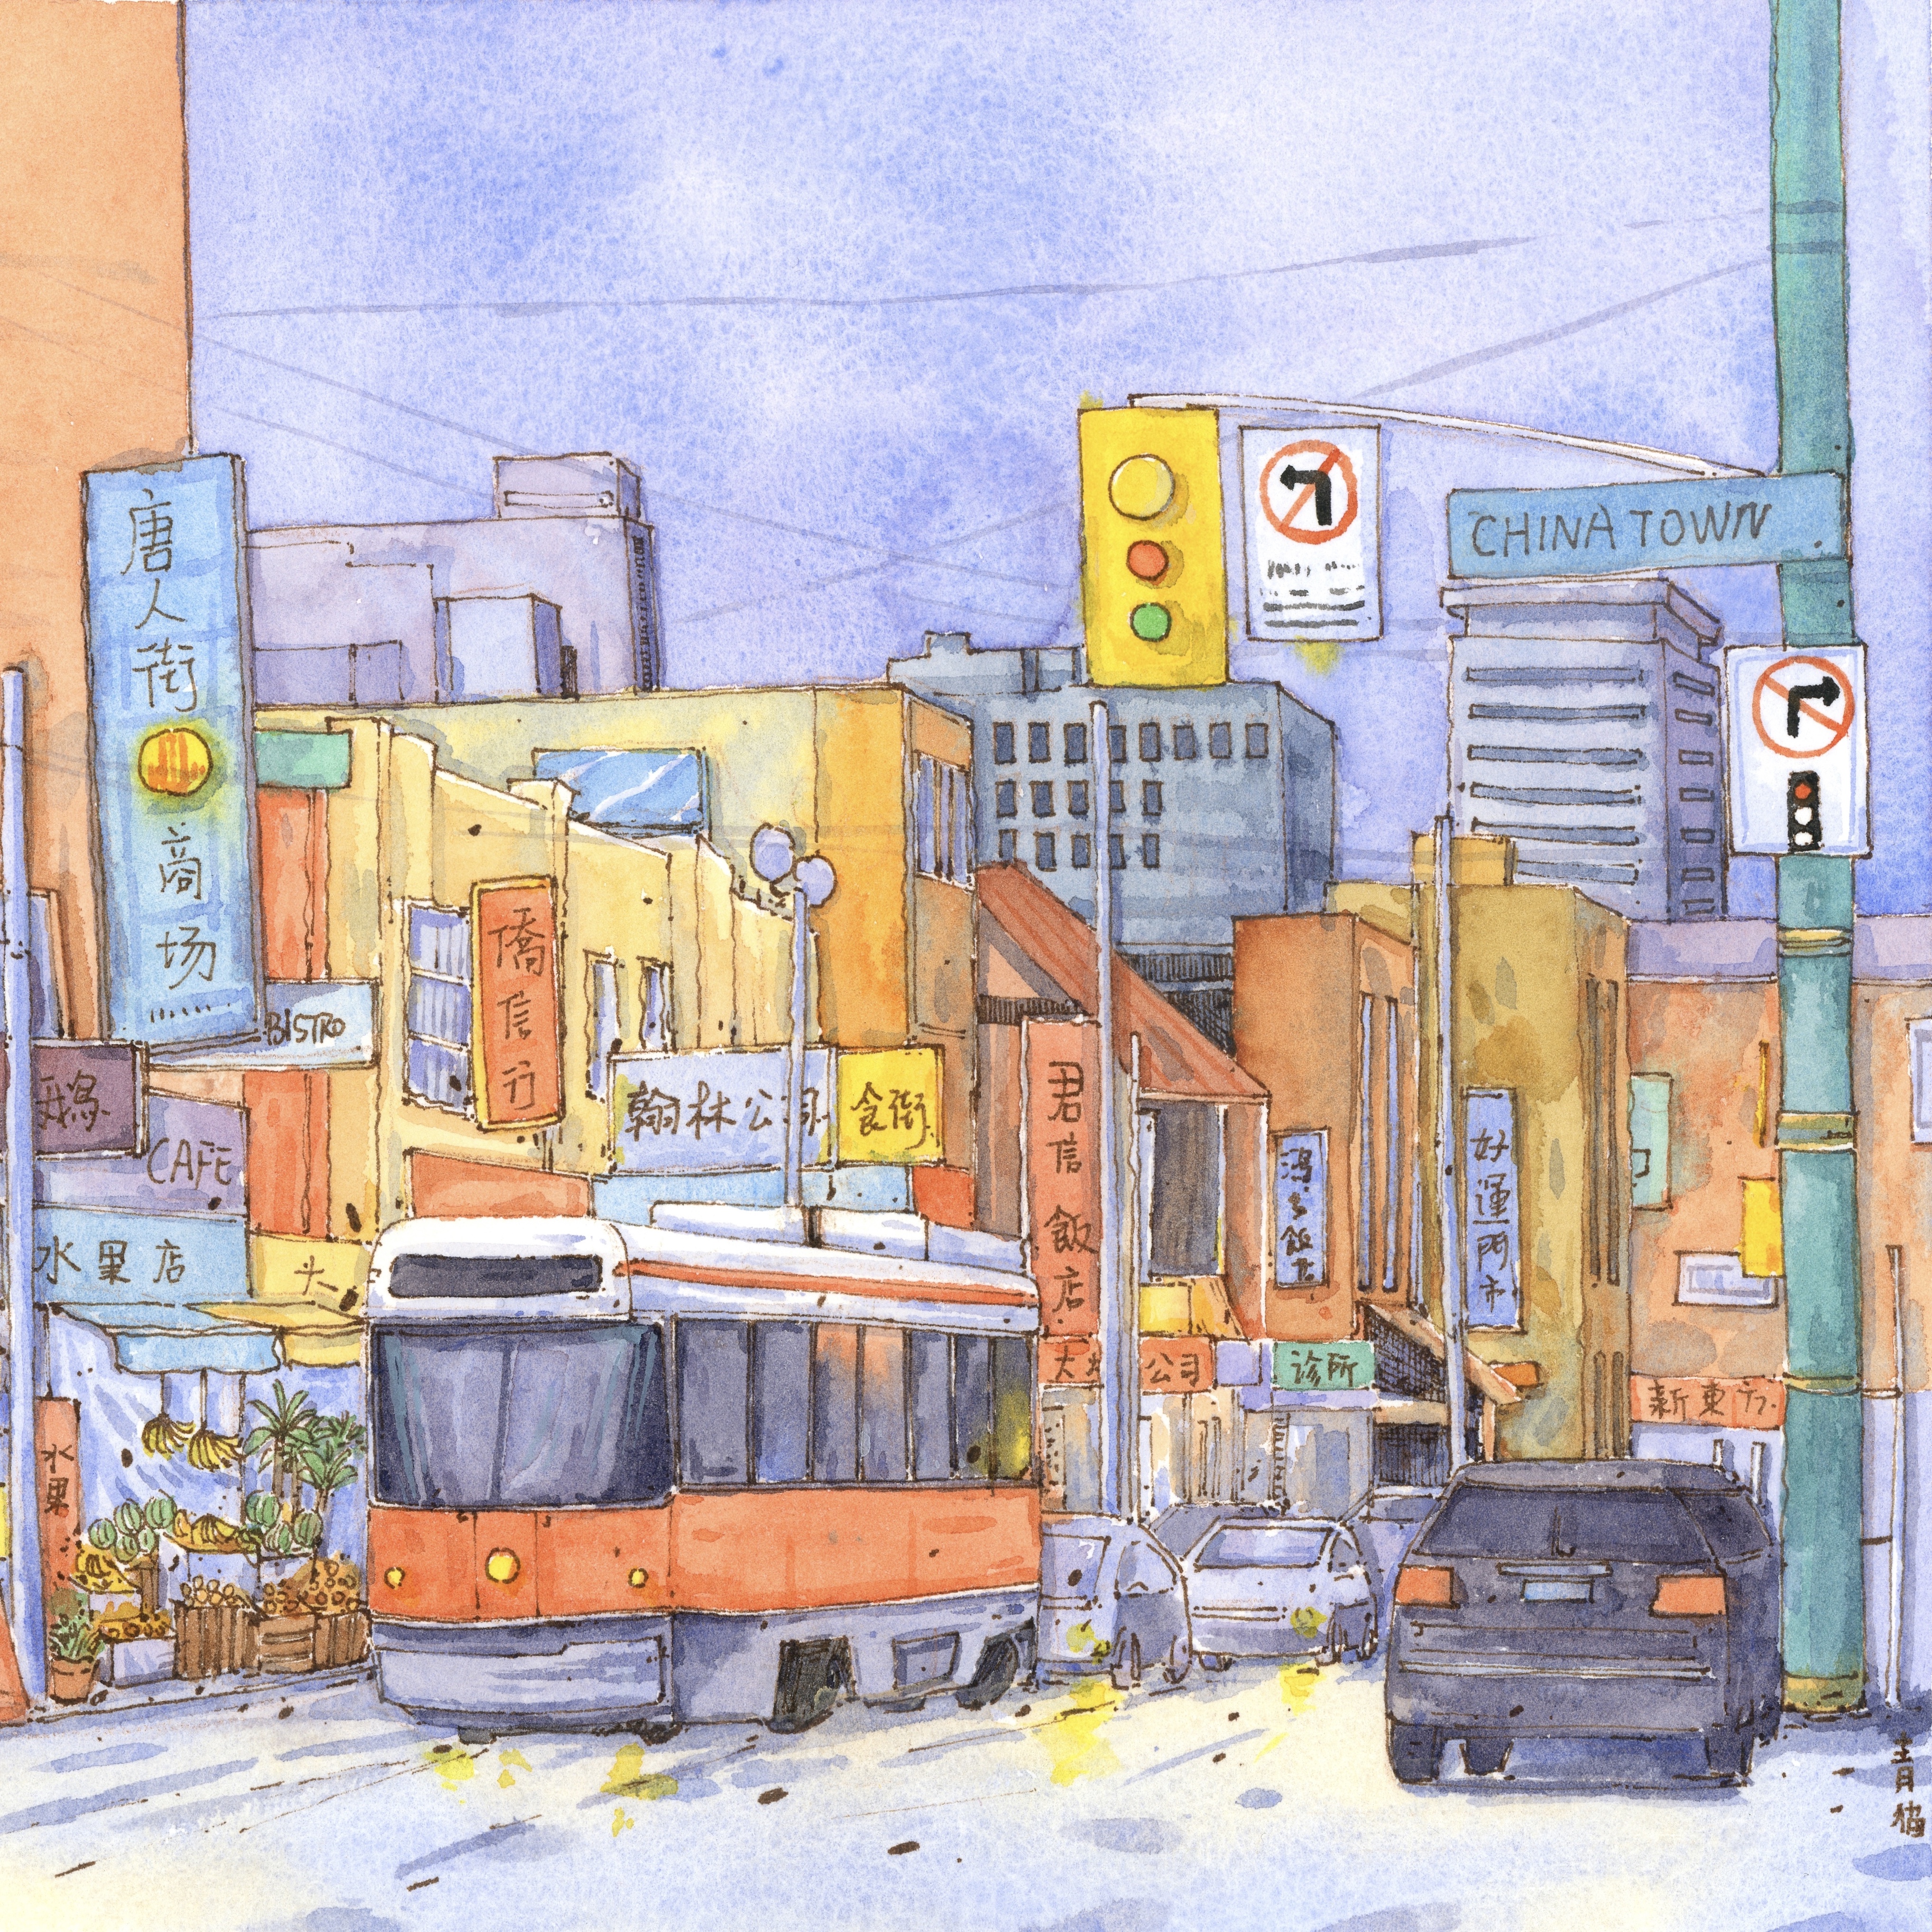 Chinese herb store, barbecue, clinic, fruit store, shopping mall...Elements that constitute a typical Chinatown. A derivatve work of Toronto Chinatown, created with watercolor brush pen.